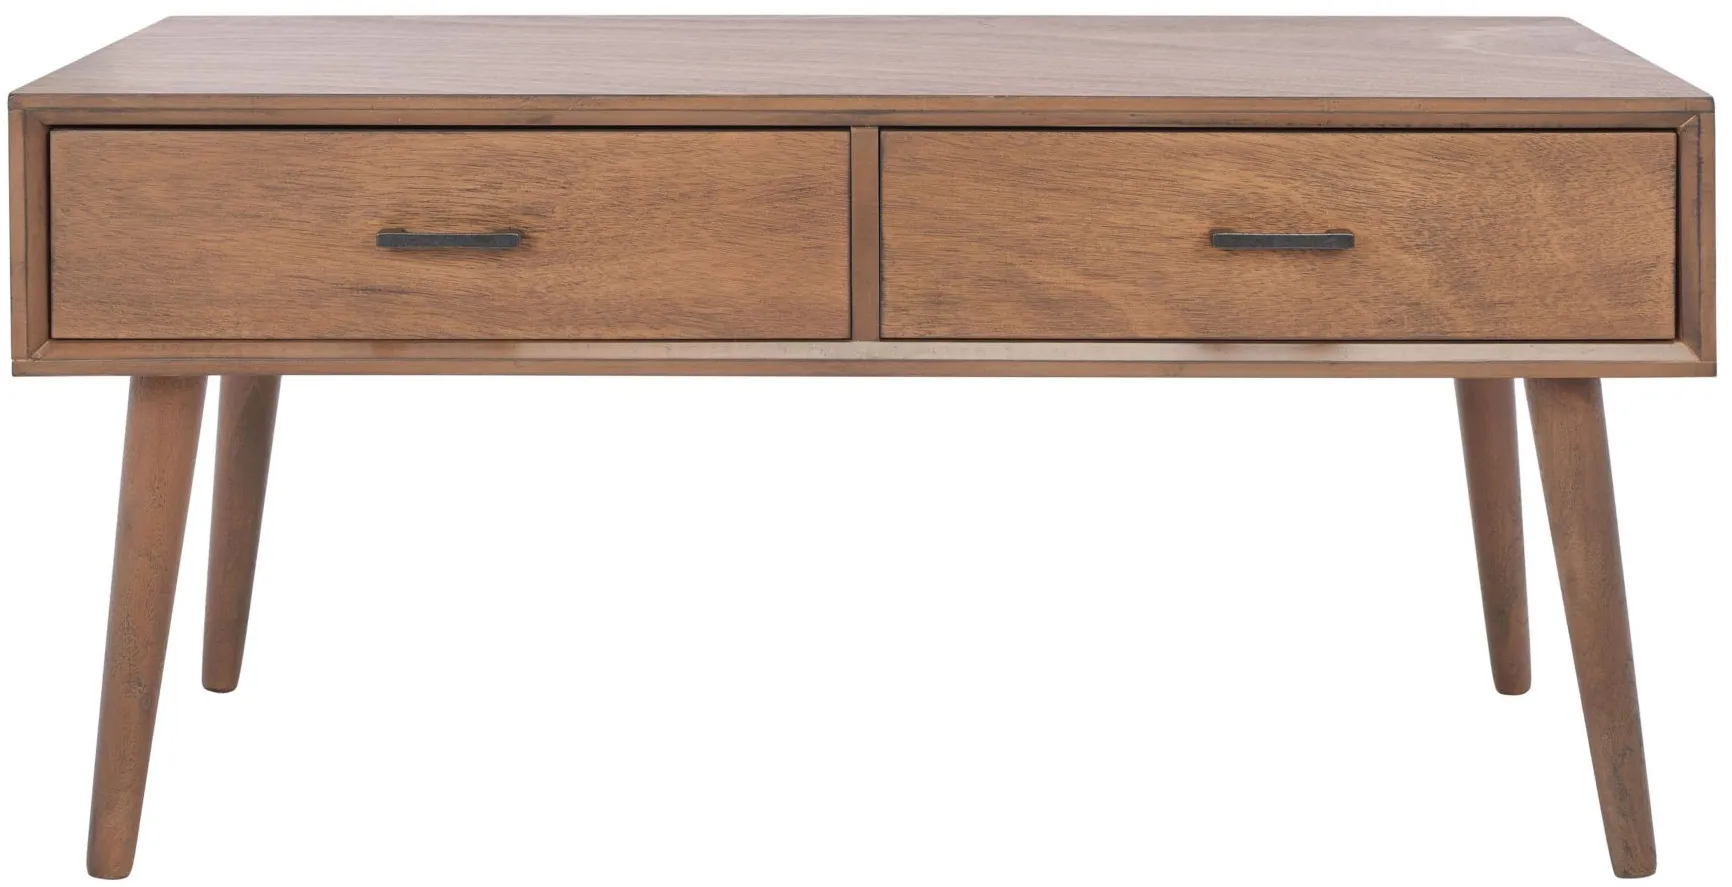 Miriam 2 Drawer Coffee Table in Brown by Safavieh